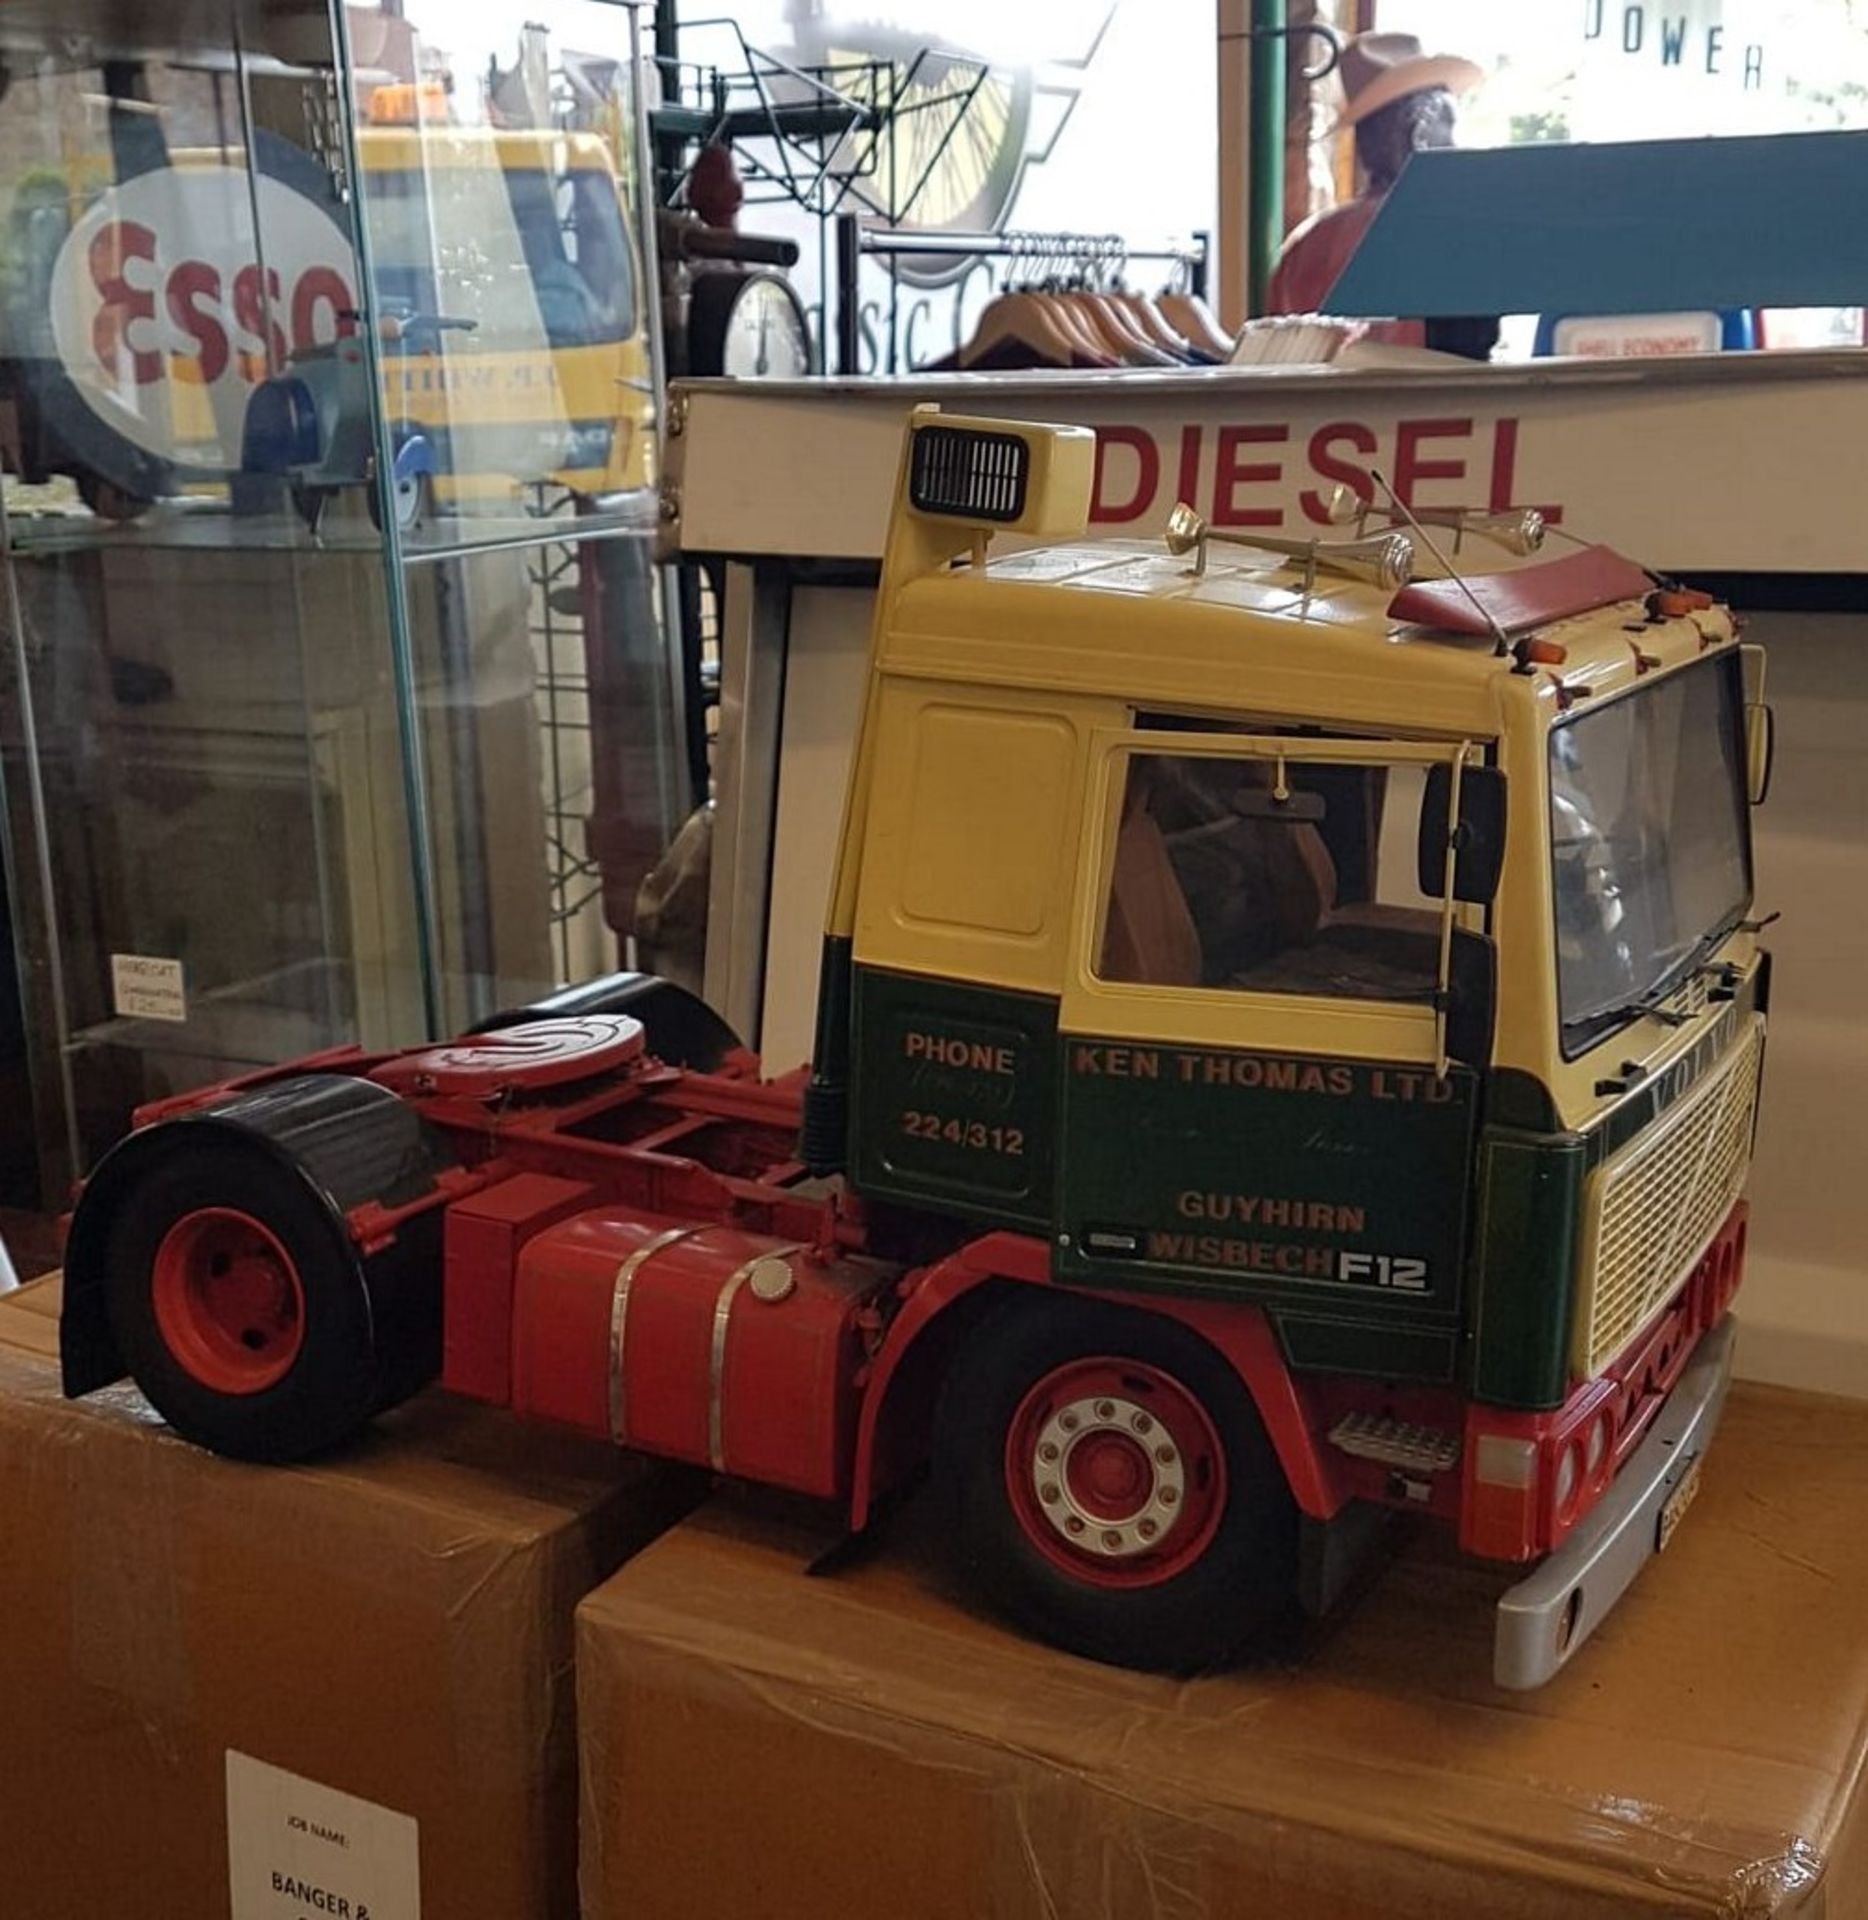 MODEL OF VOLVO F12 ARTICULATED TRUCK